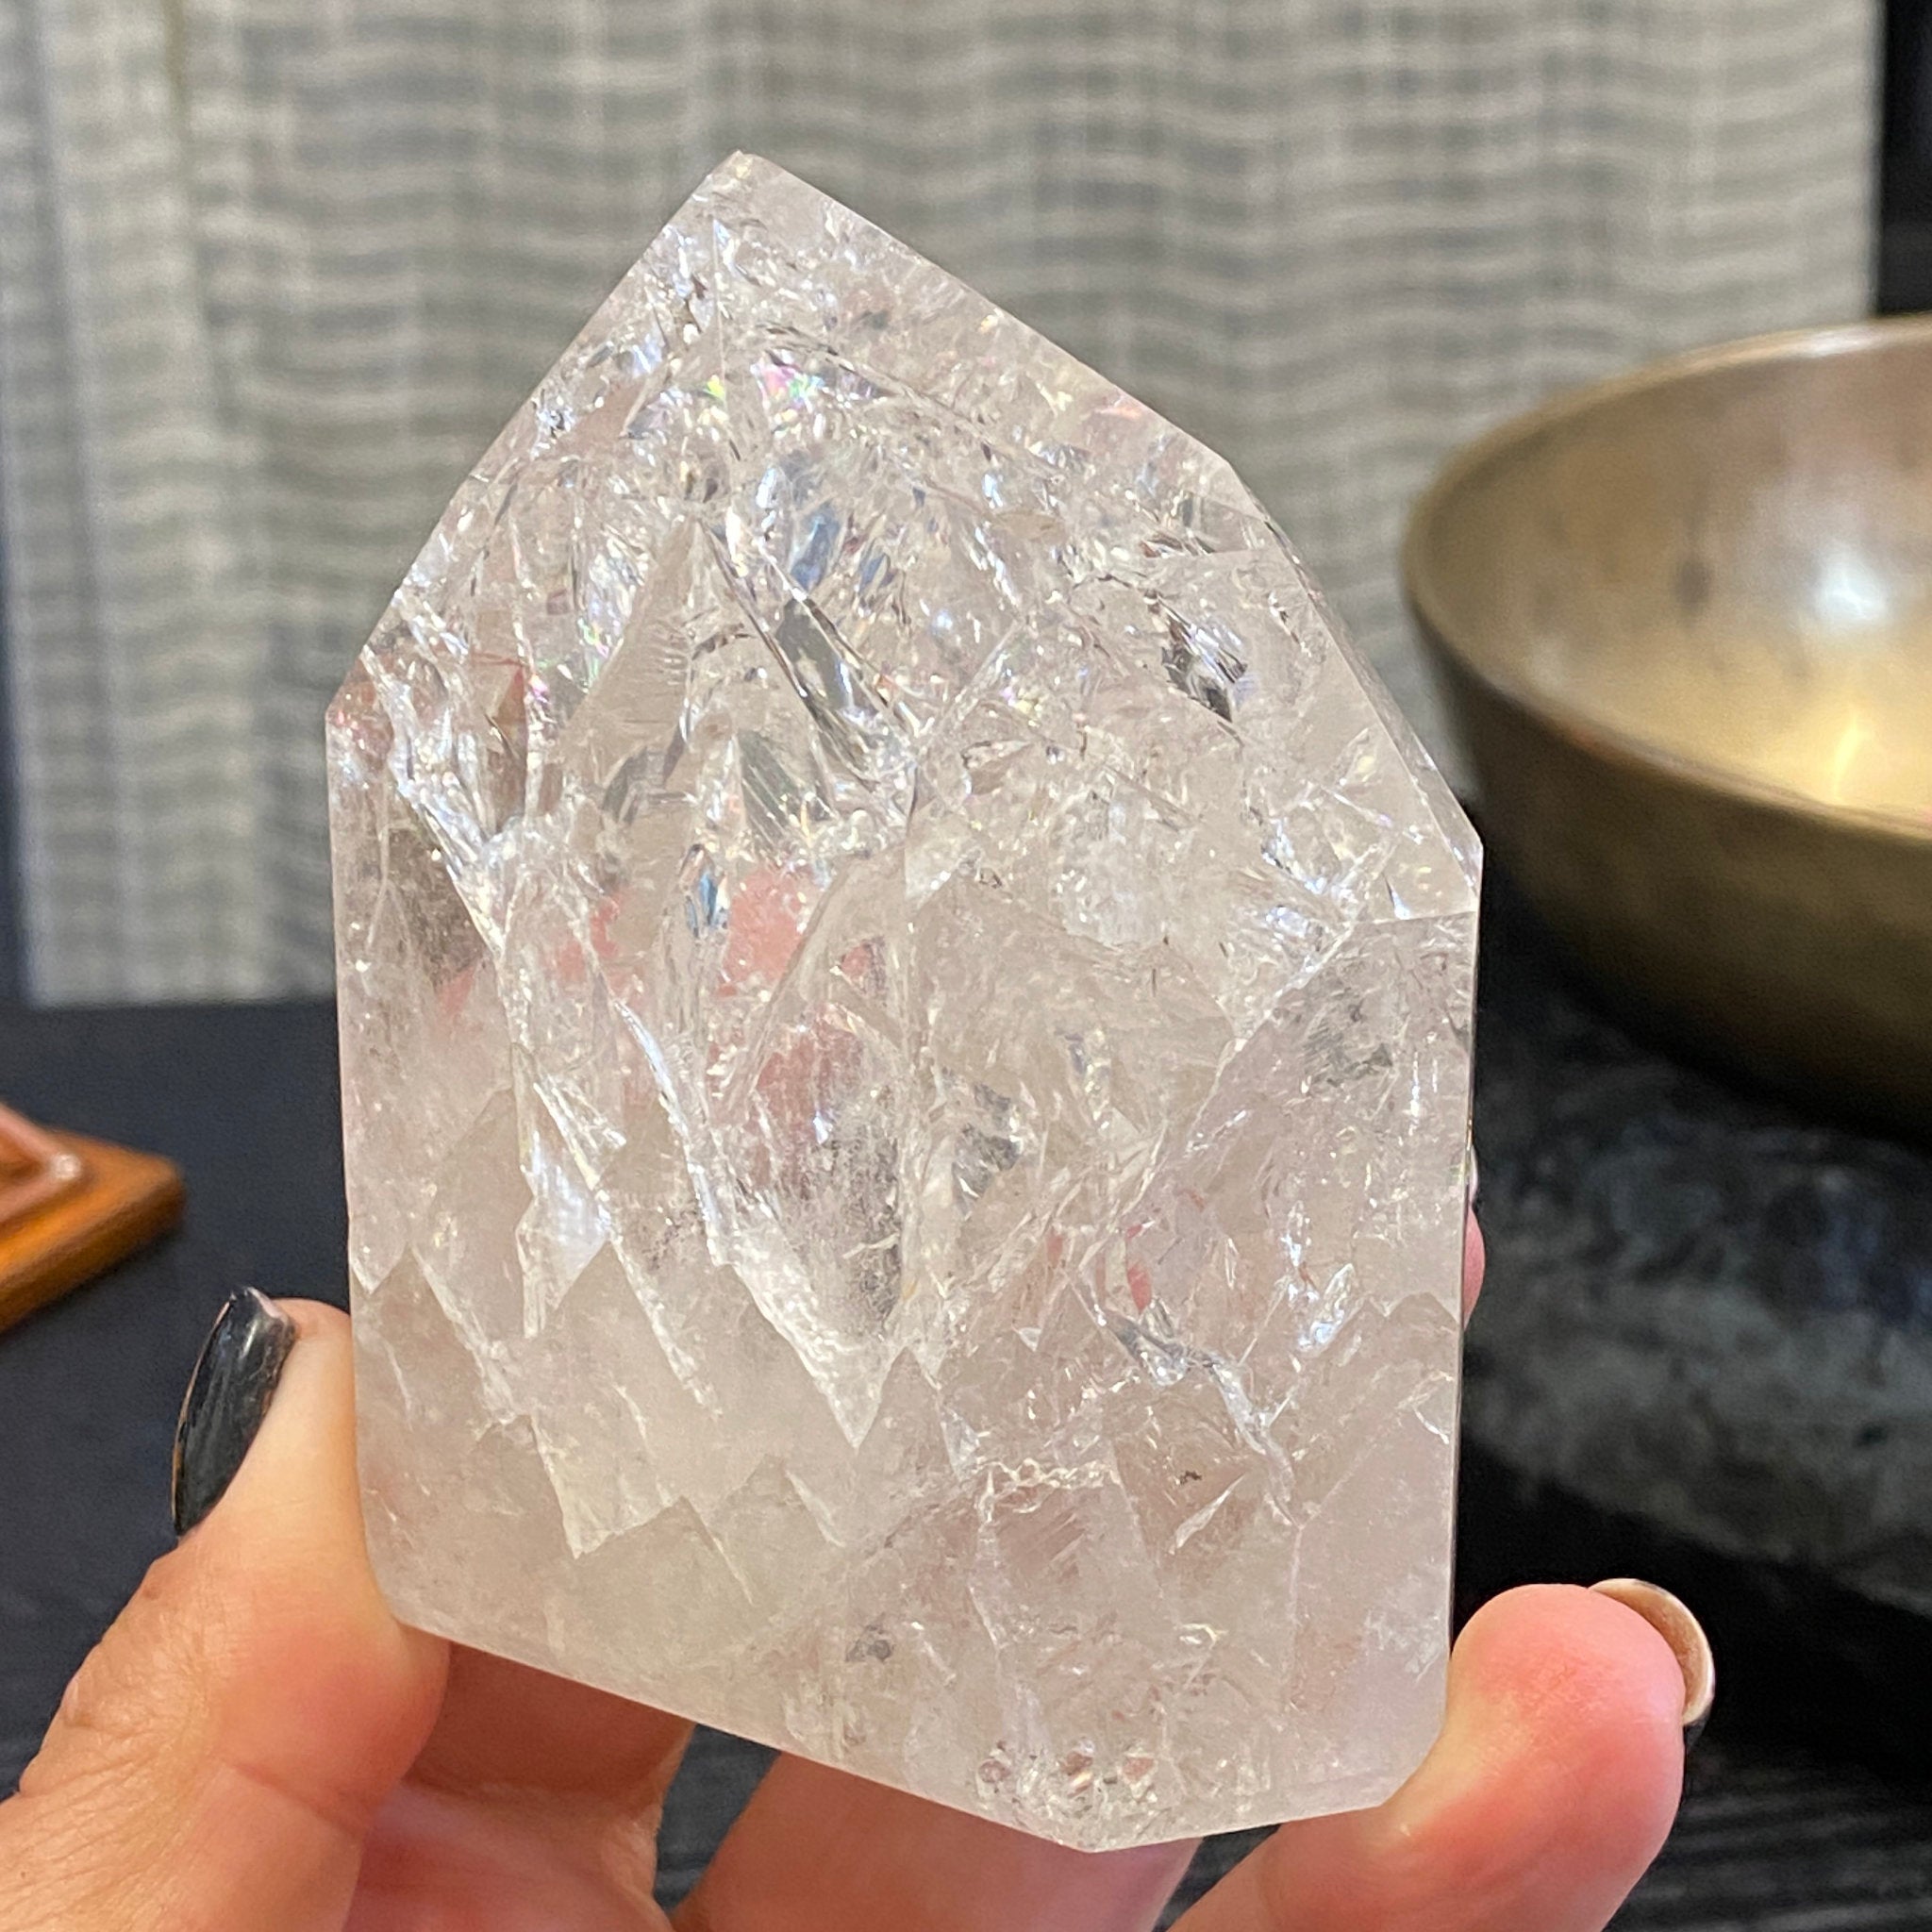 Fire and Ice Quartz stand up